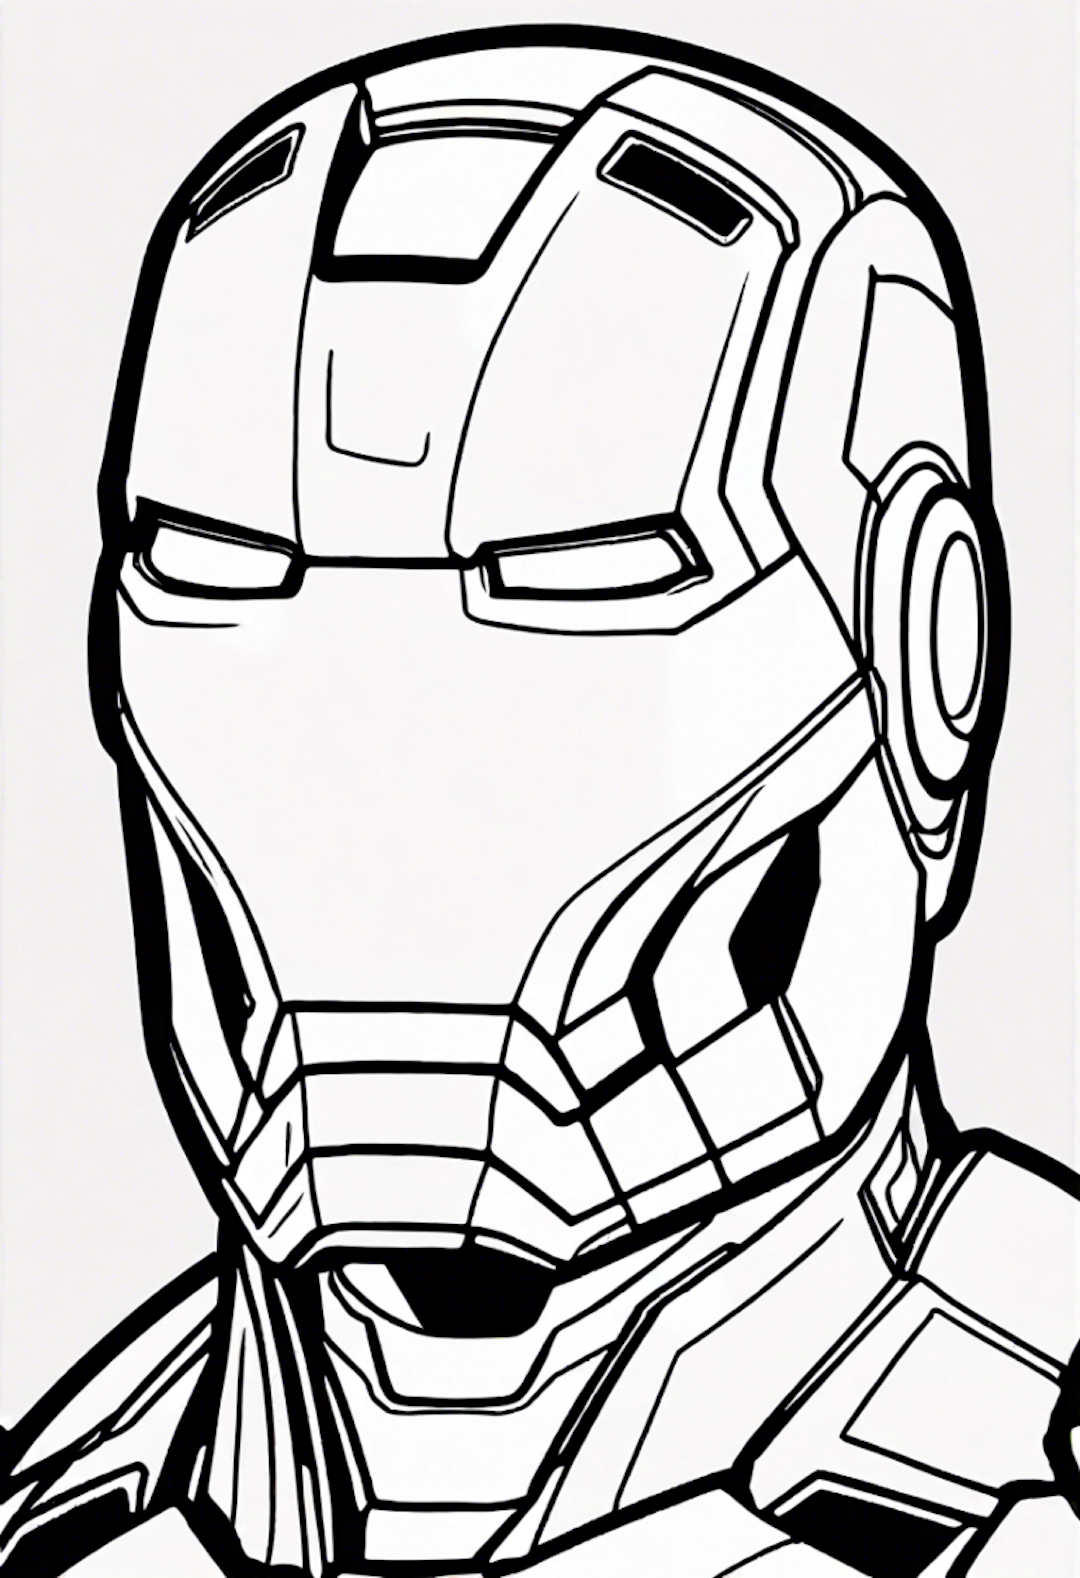 Iron Man Coloring Page Adventure coloring pages